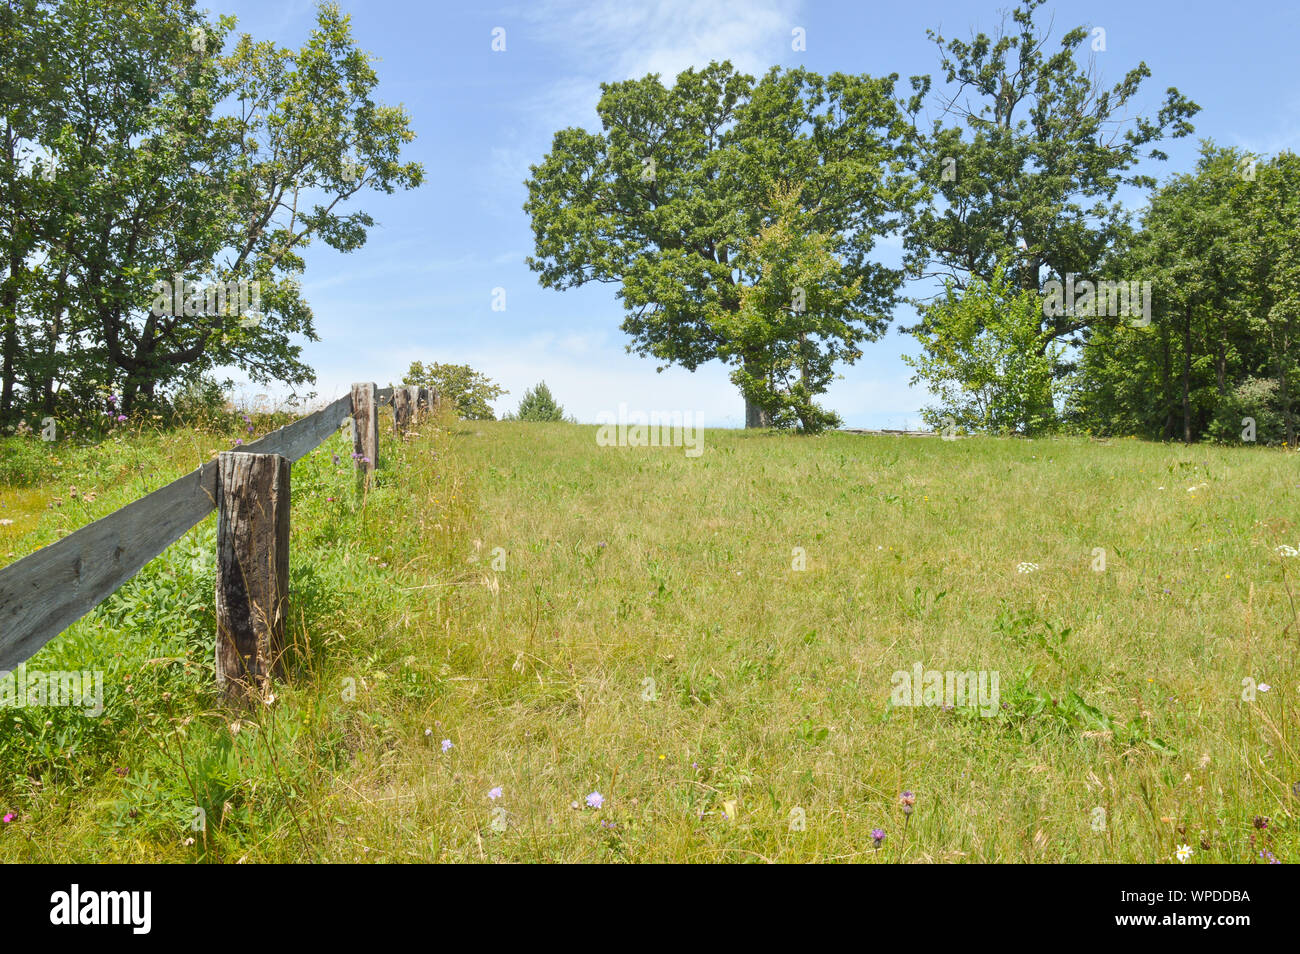 Ranch fence on green field with oak trees, summer sunny day Stock Photo